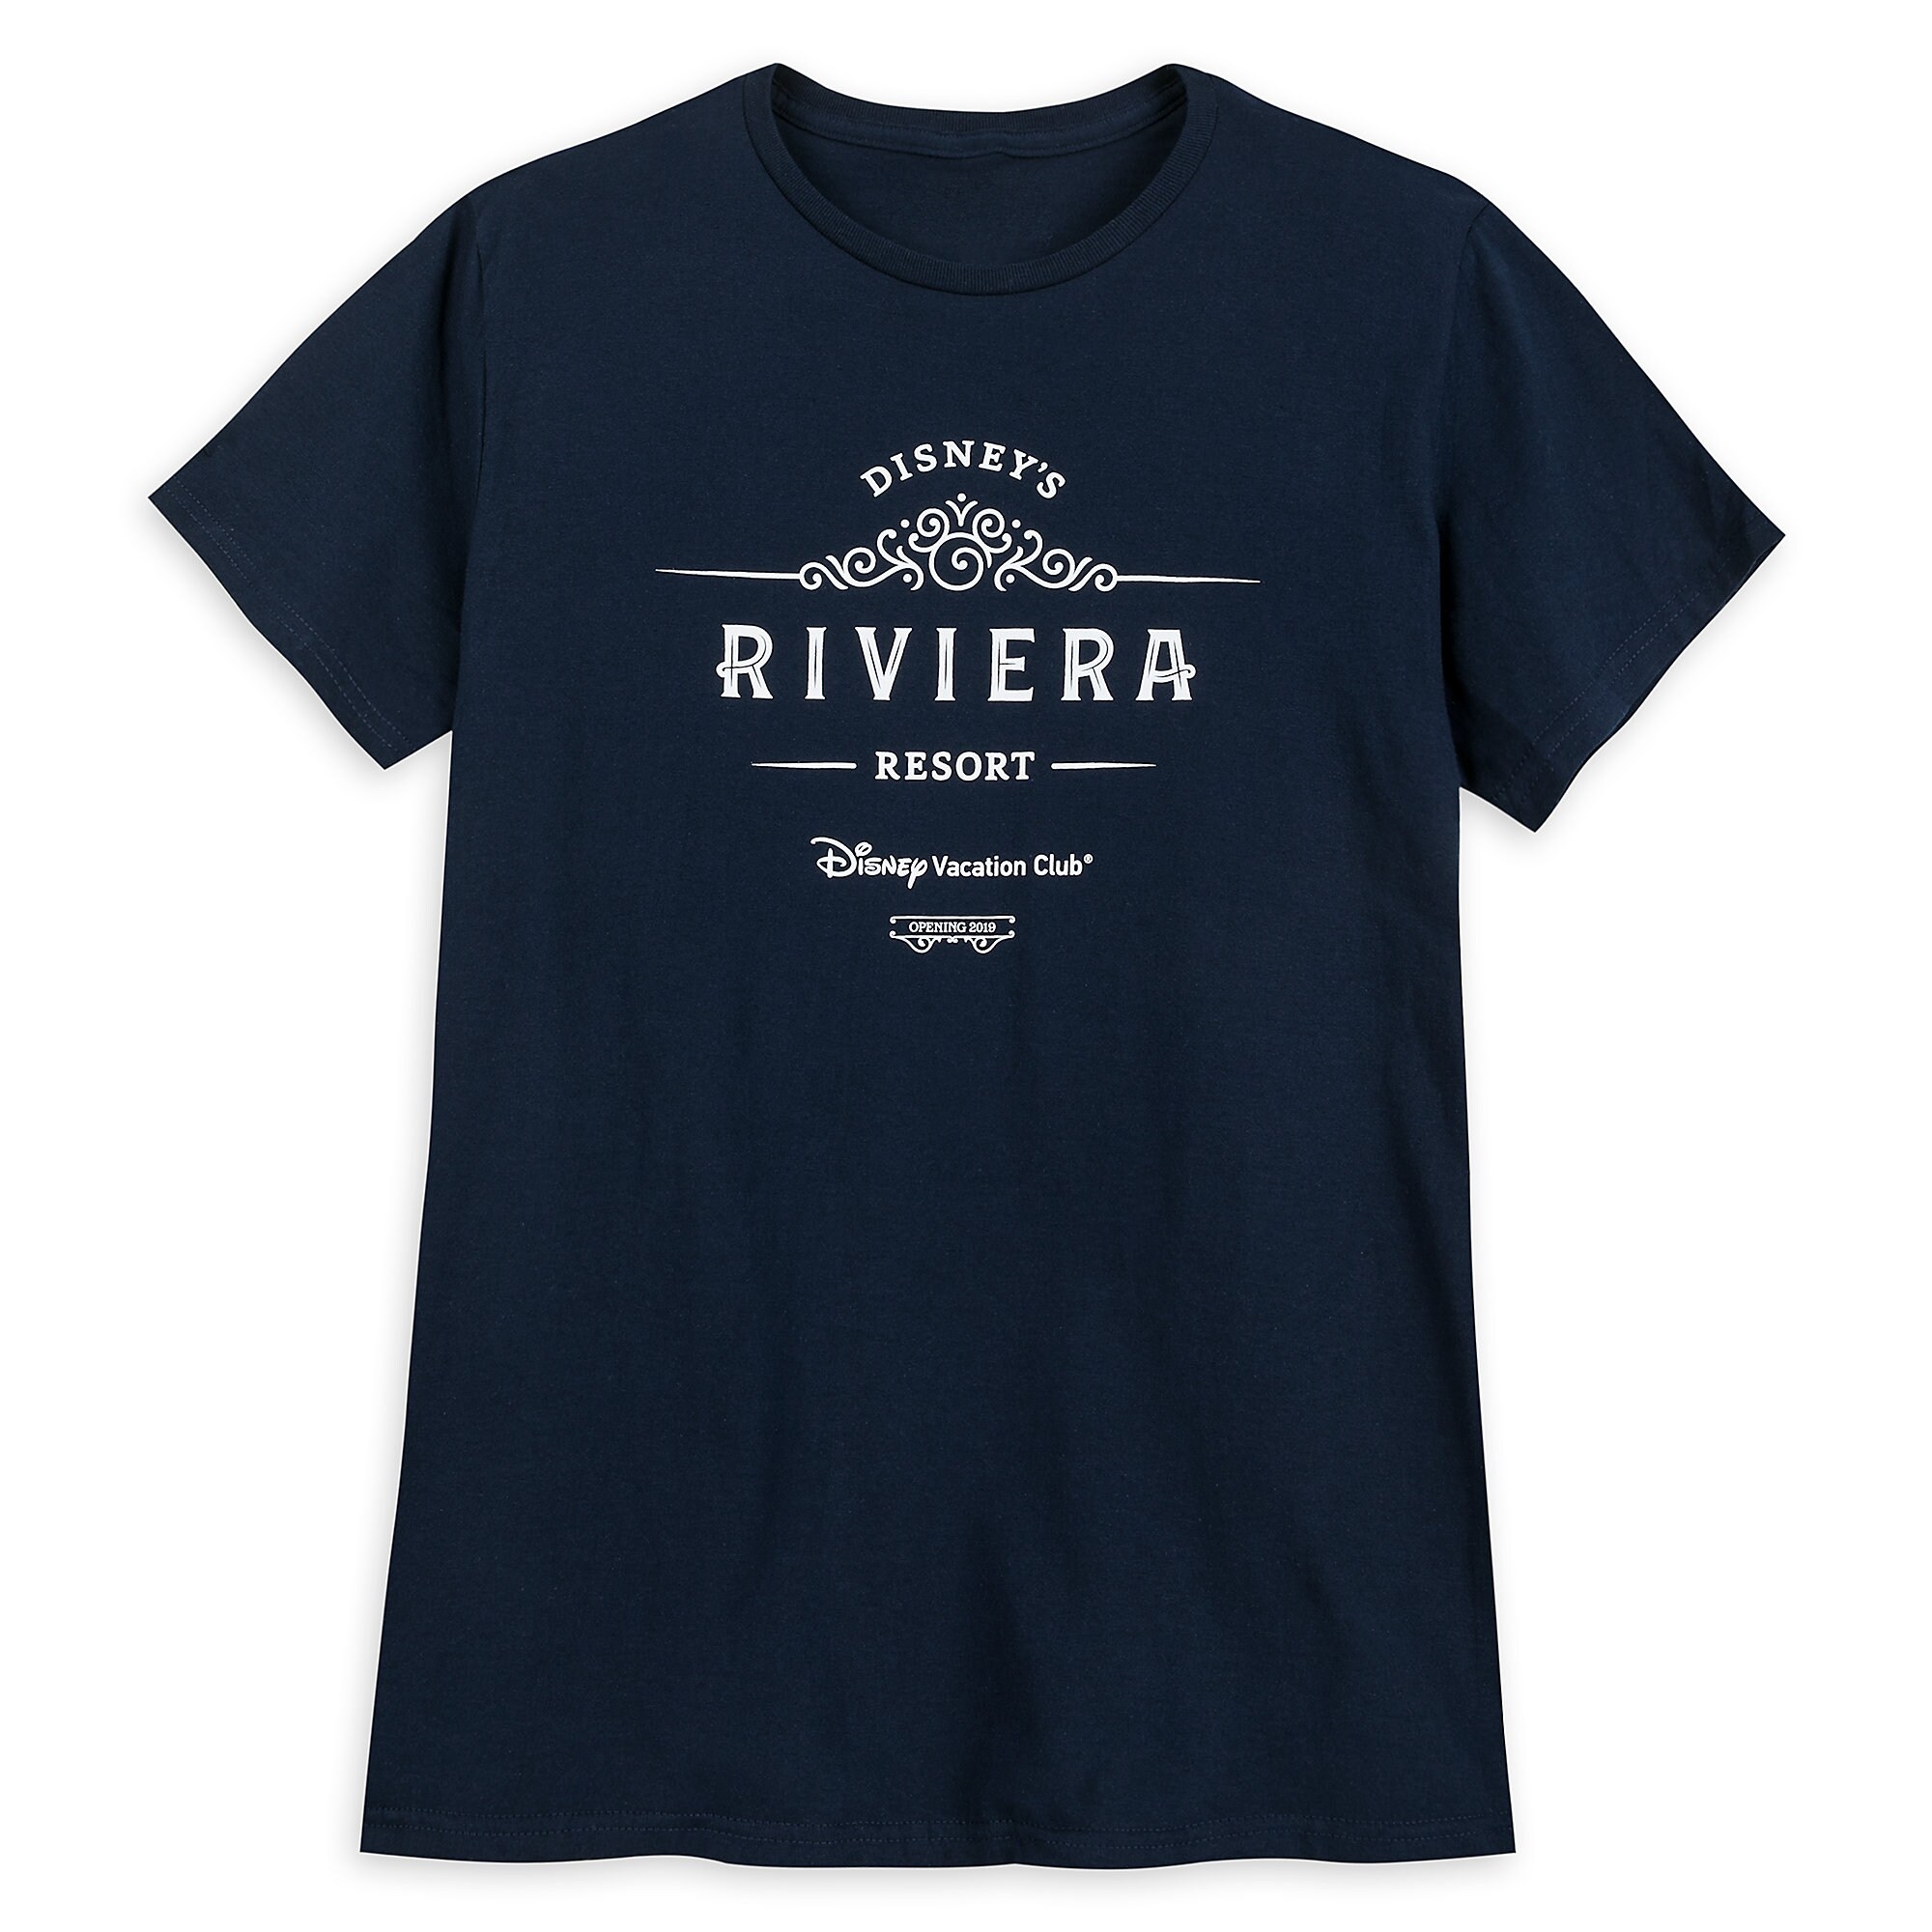 Disney's Riviera Resort T-Shirt for Adults - Disney Vacation Club is ...